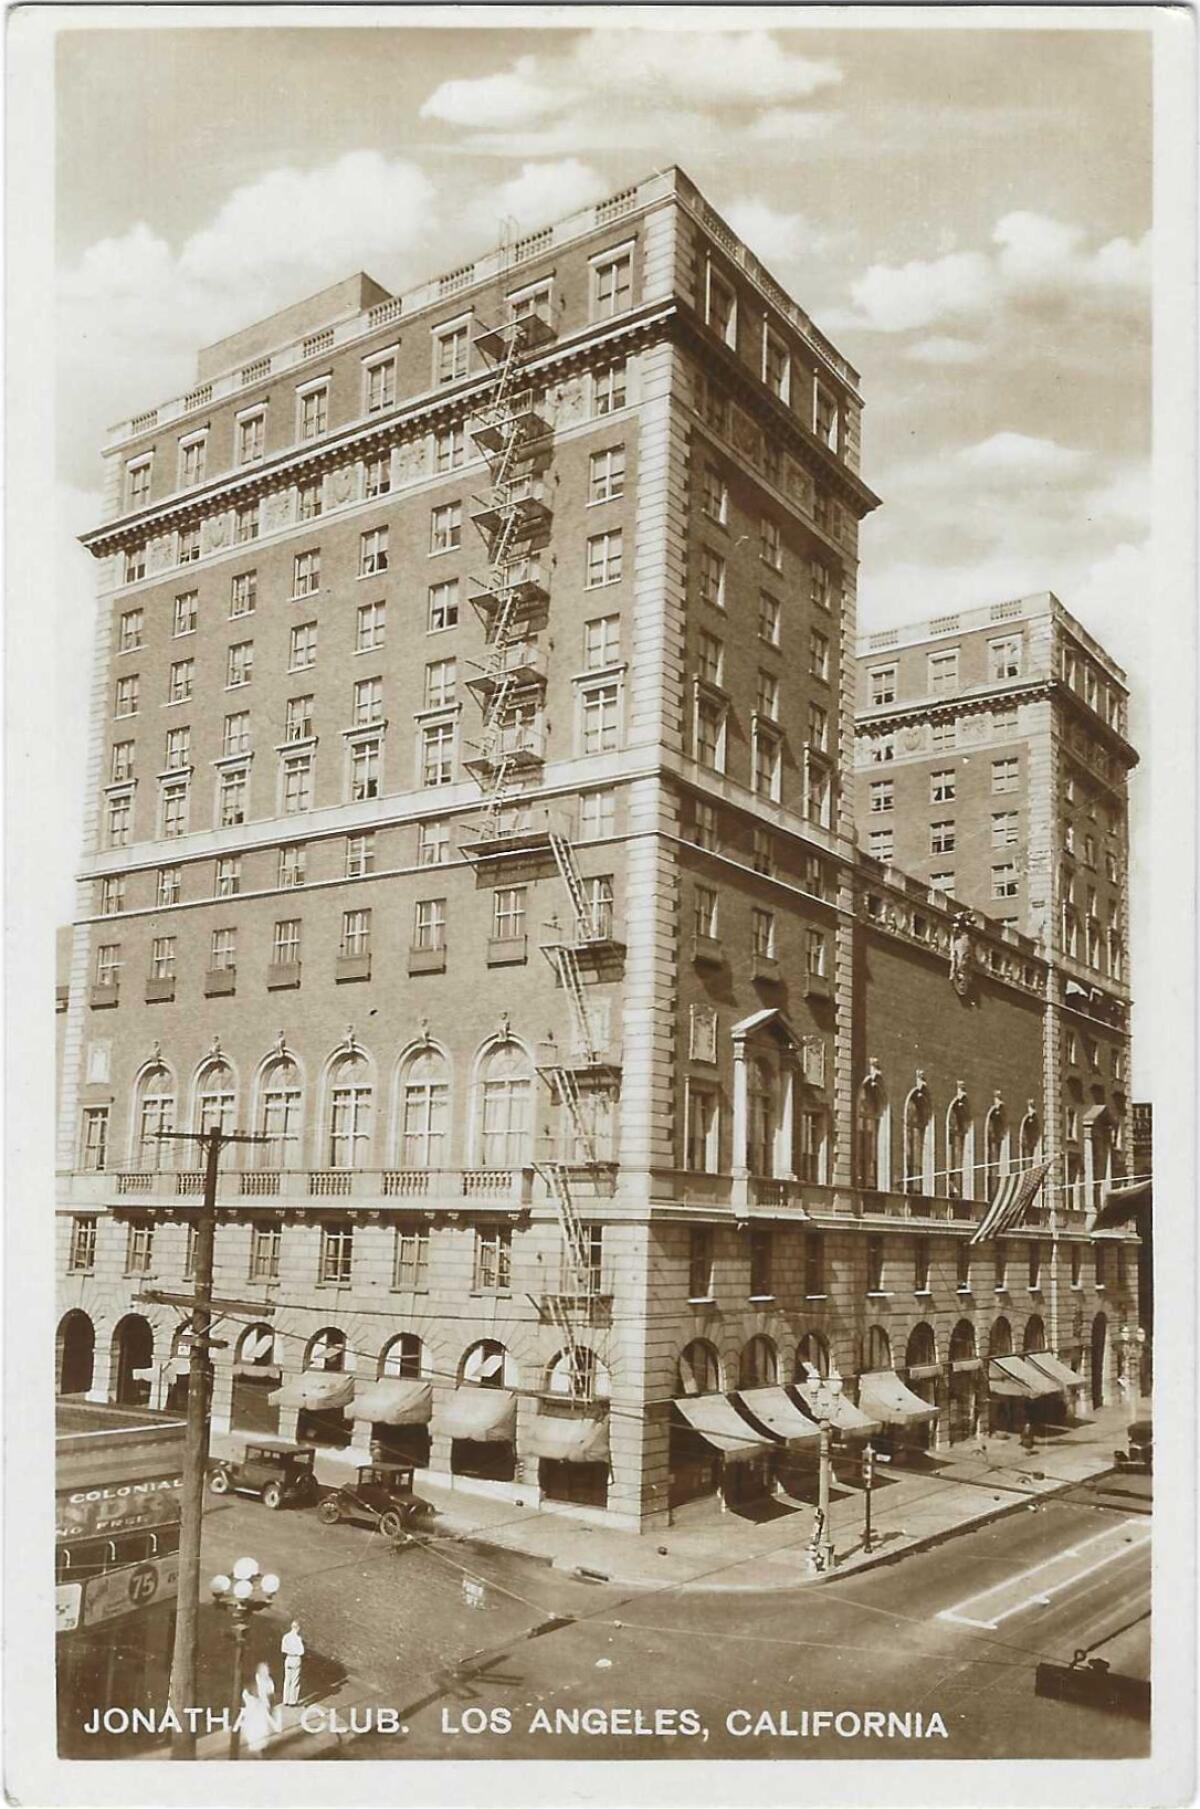 Sepia tone image of the Jonathan Club building at 6th and Figueroa streets